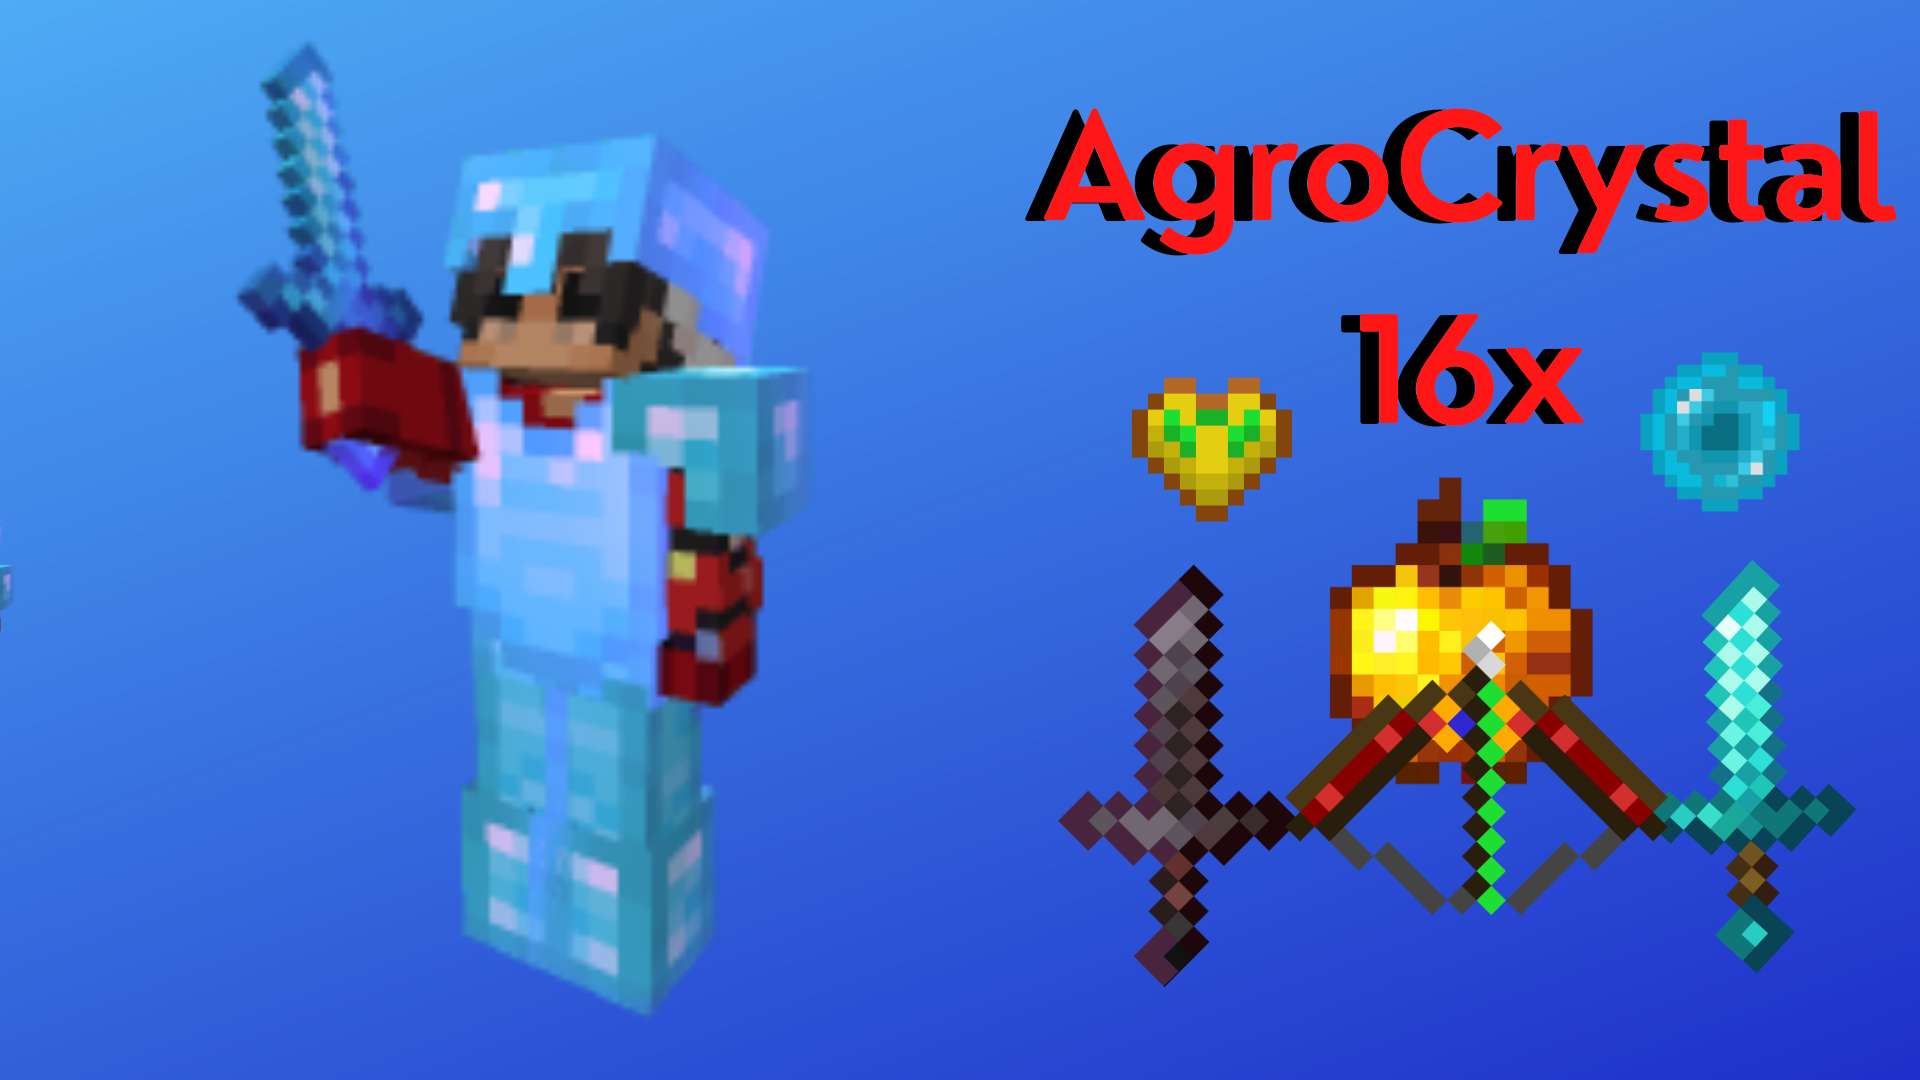 AgroCrystal - Default Edit  - 1.17 16x by AgronGamezYT on PvPRP